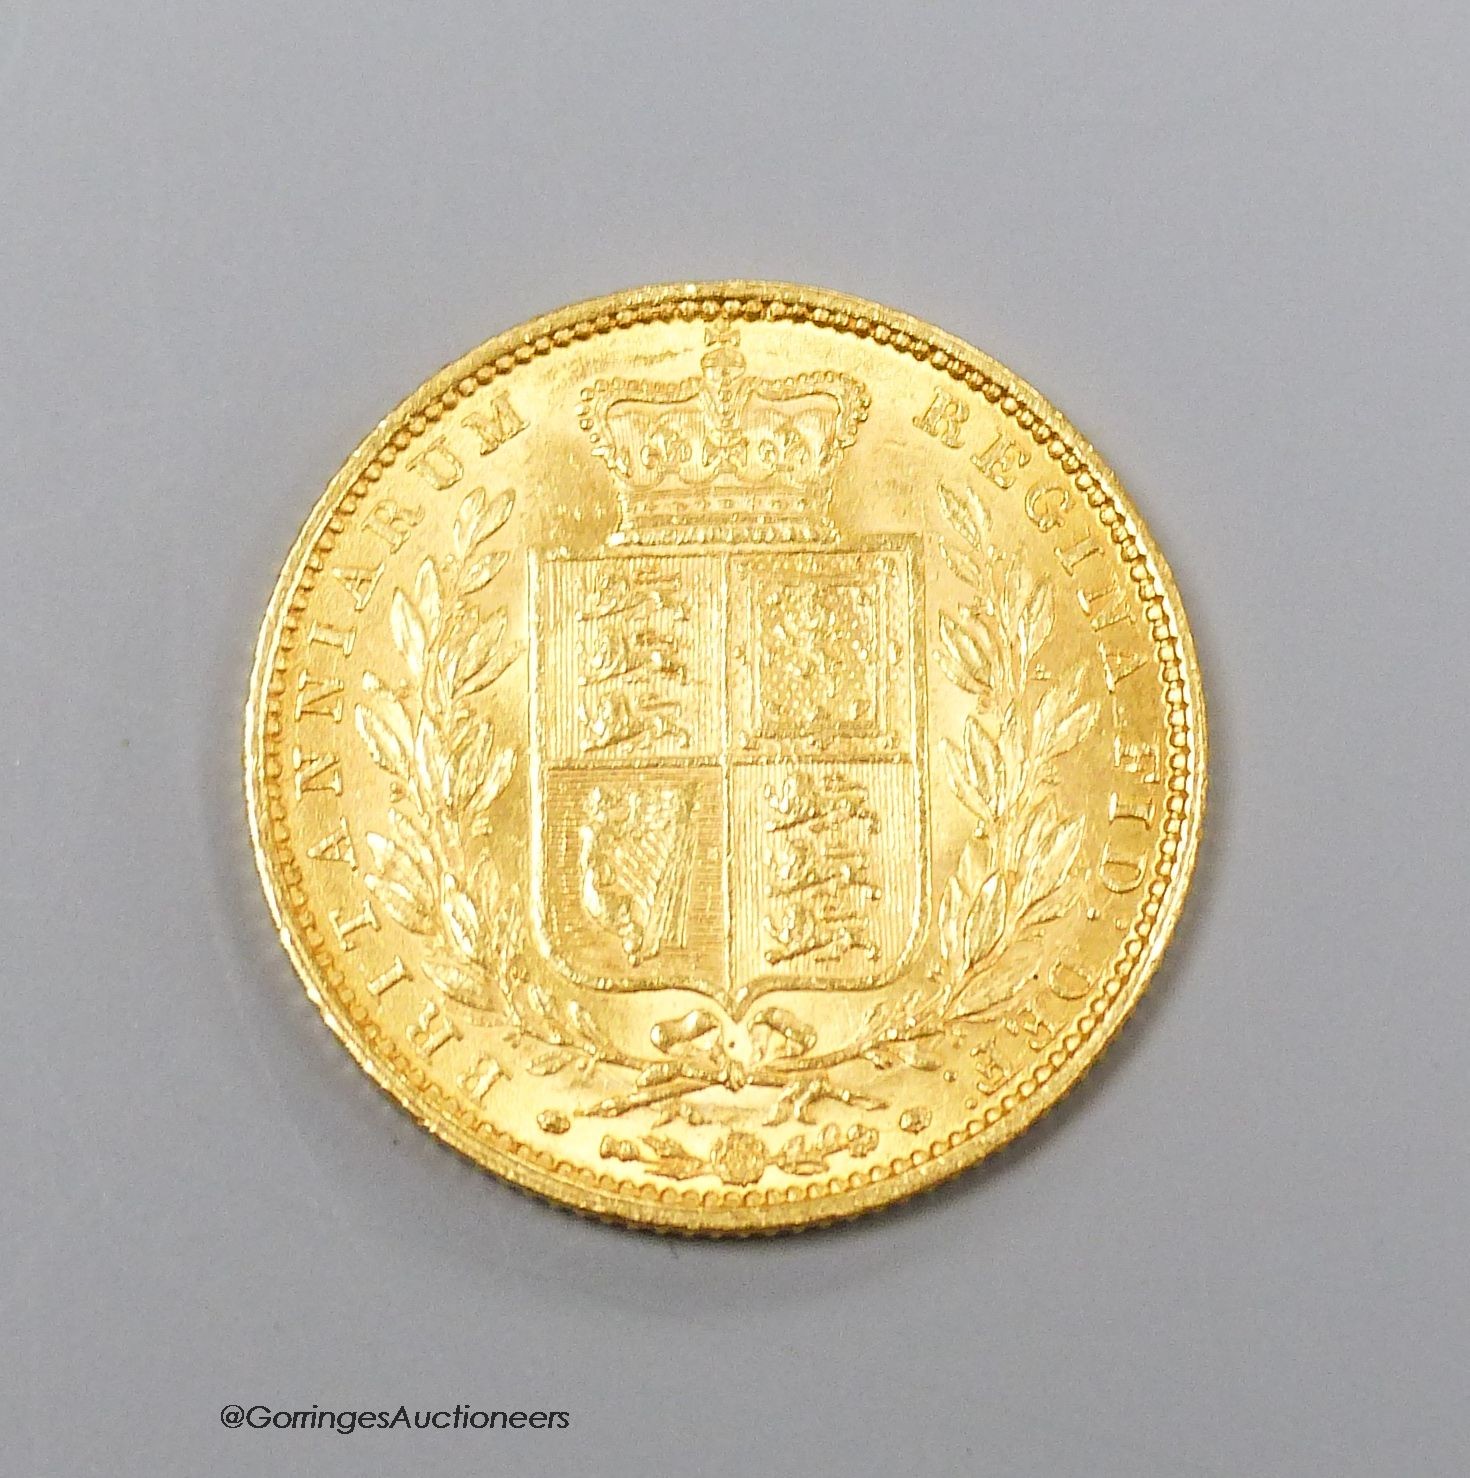 A Victoria gold sovereign 1852, wear to the edge and occasional minor nicks otherwise AEF